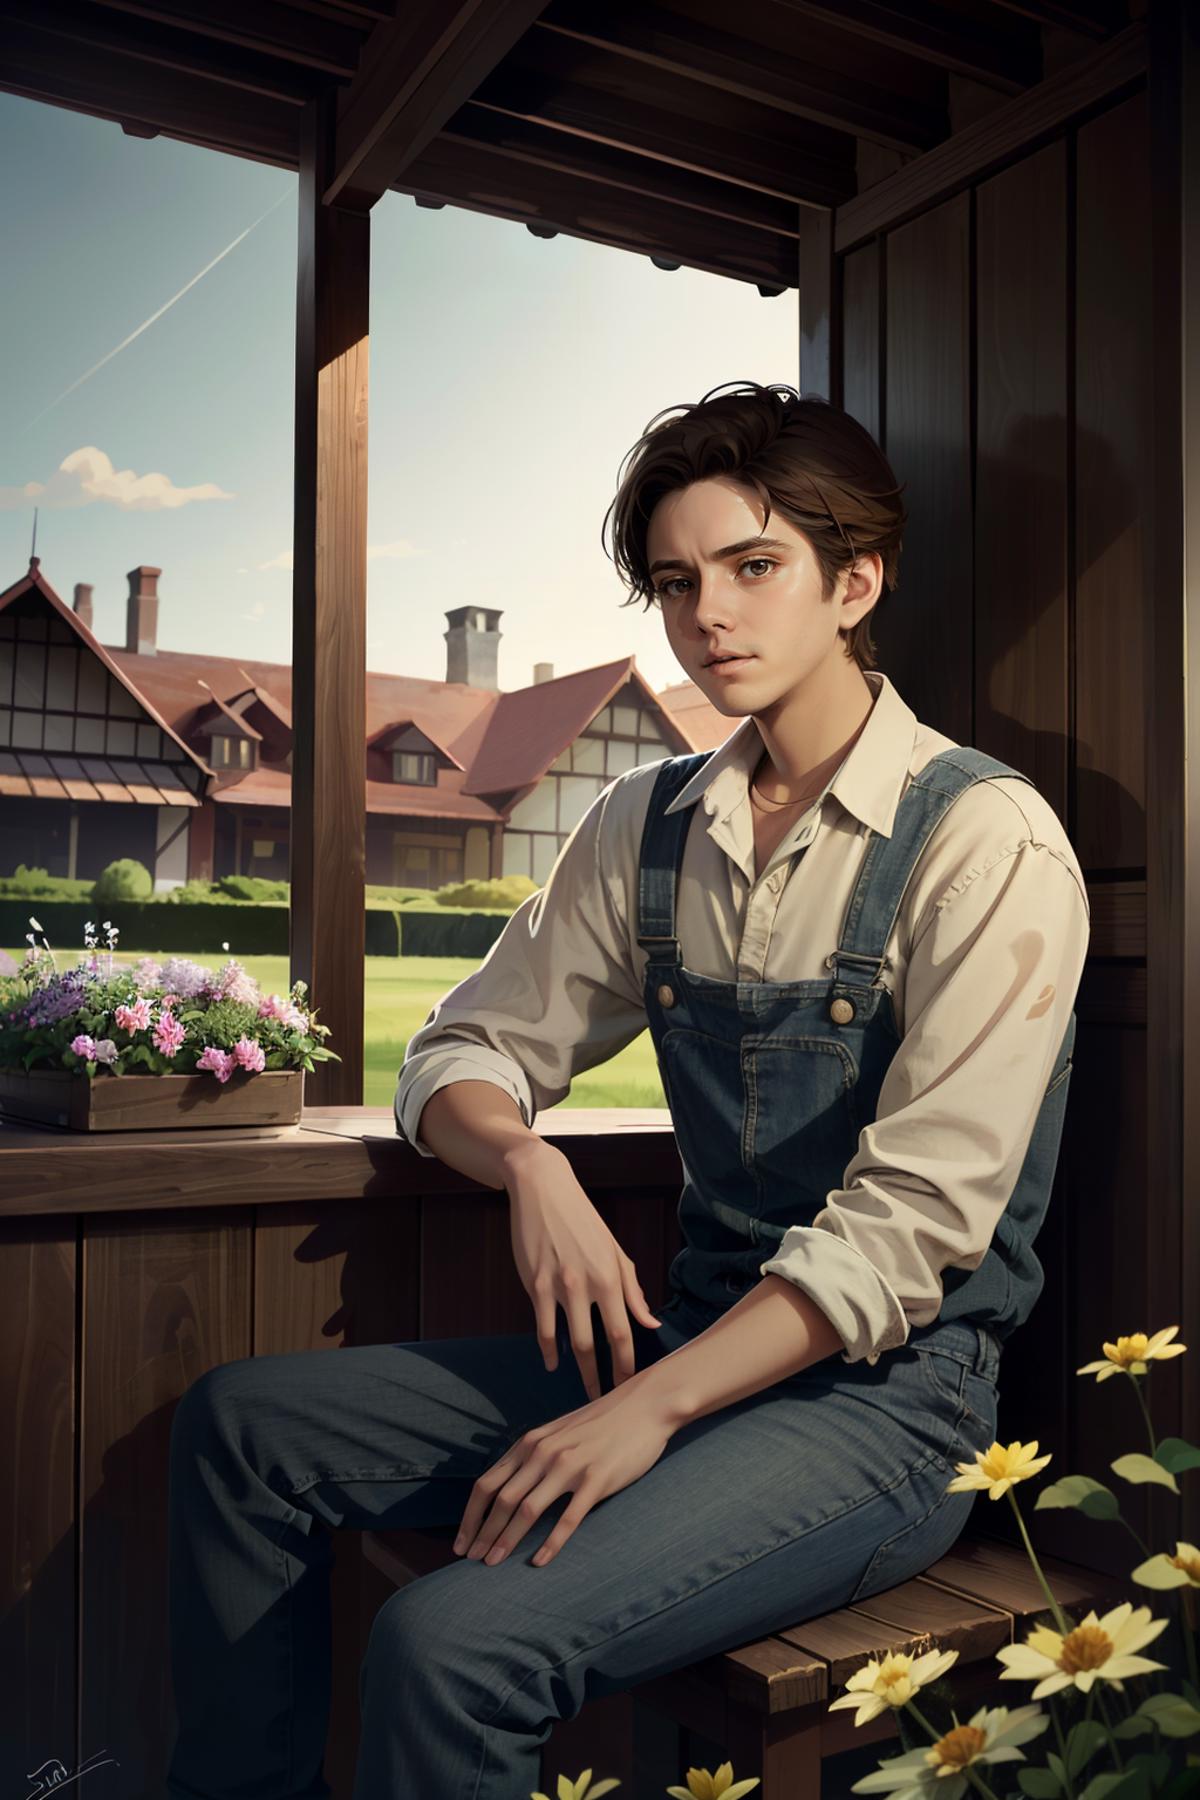 Dylan from The Quarry image by BloodRedKittie